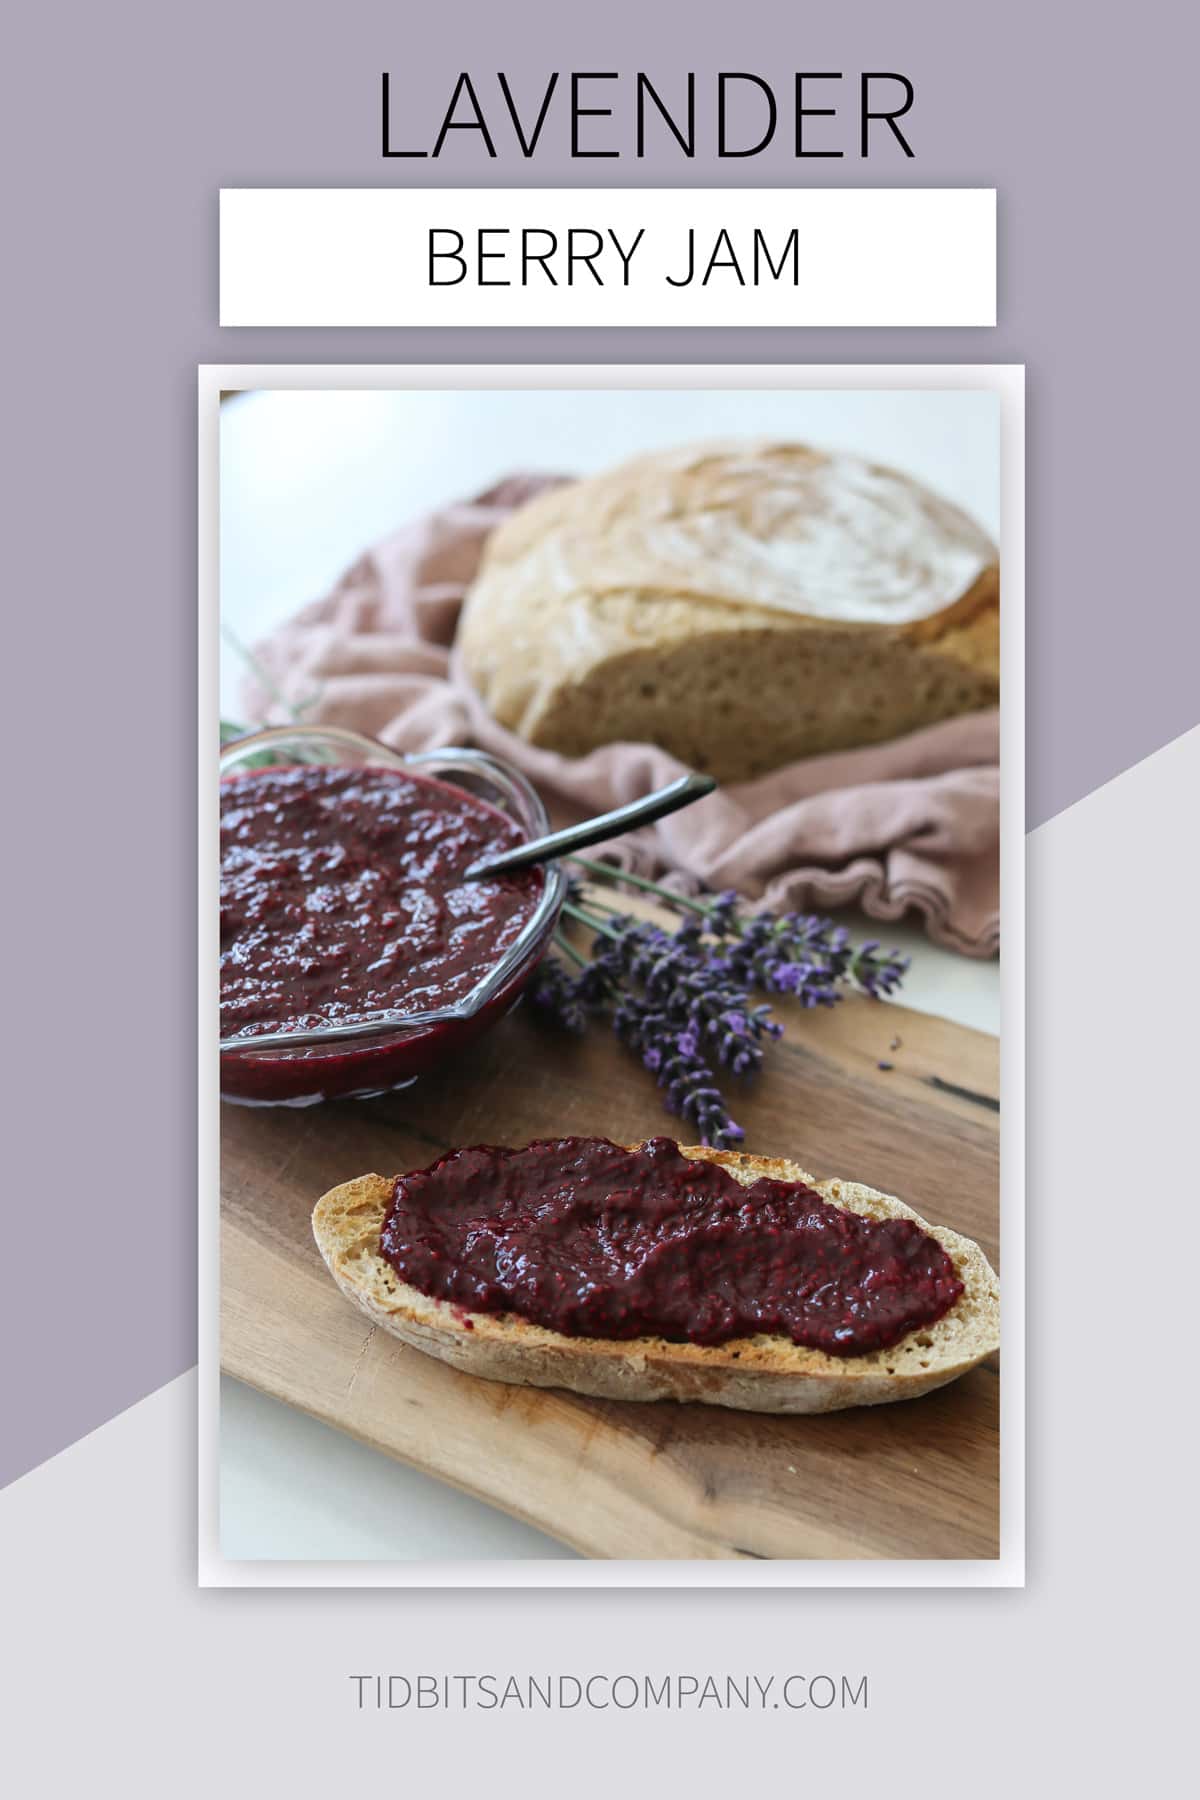 Lavender berry jam spread on a piece of bread and in a bowl